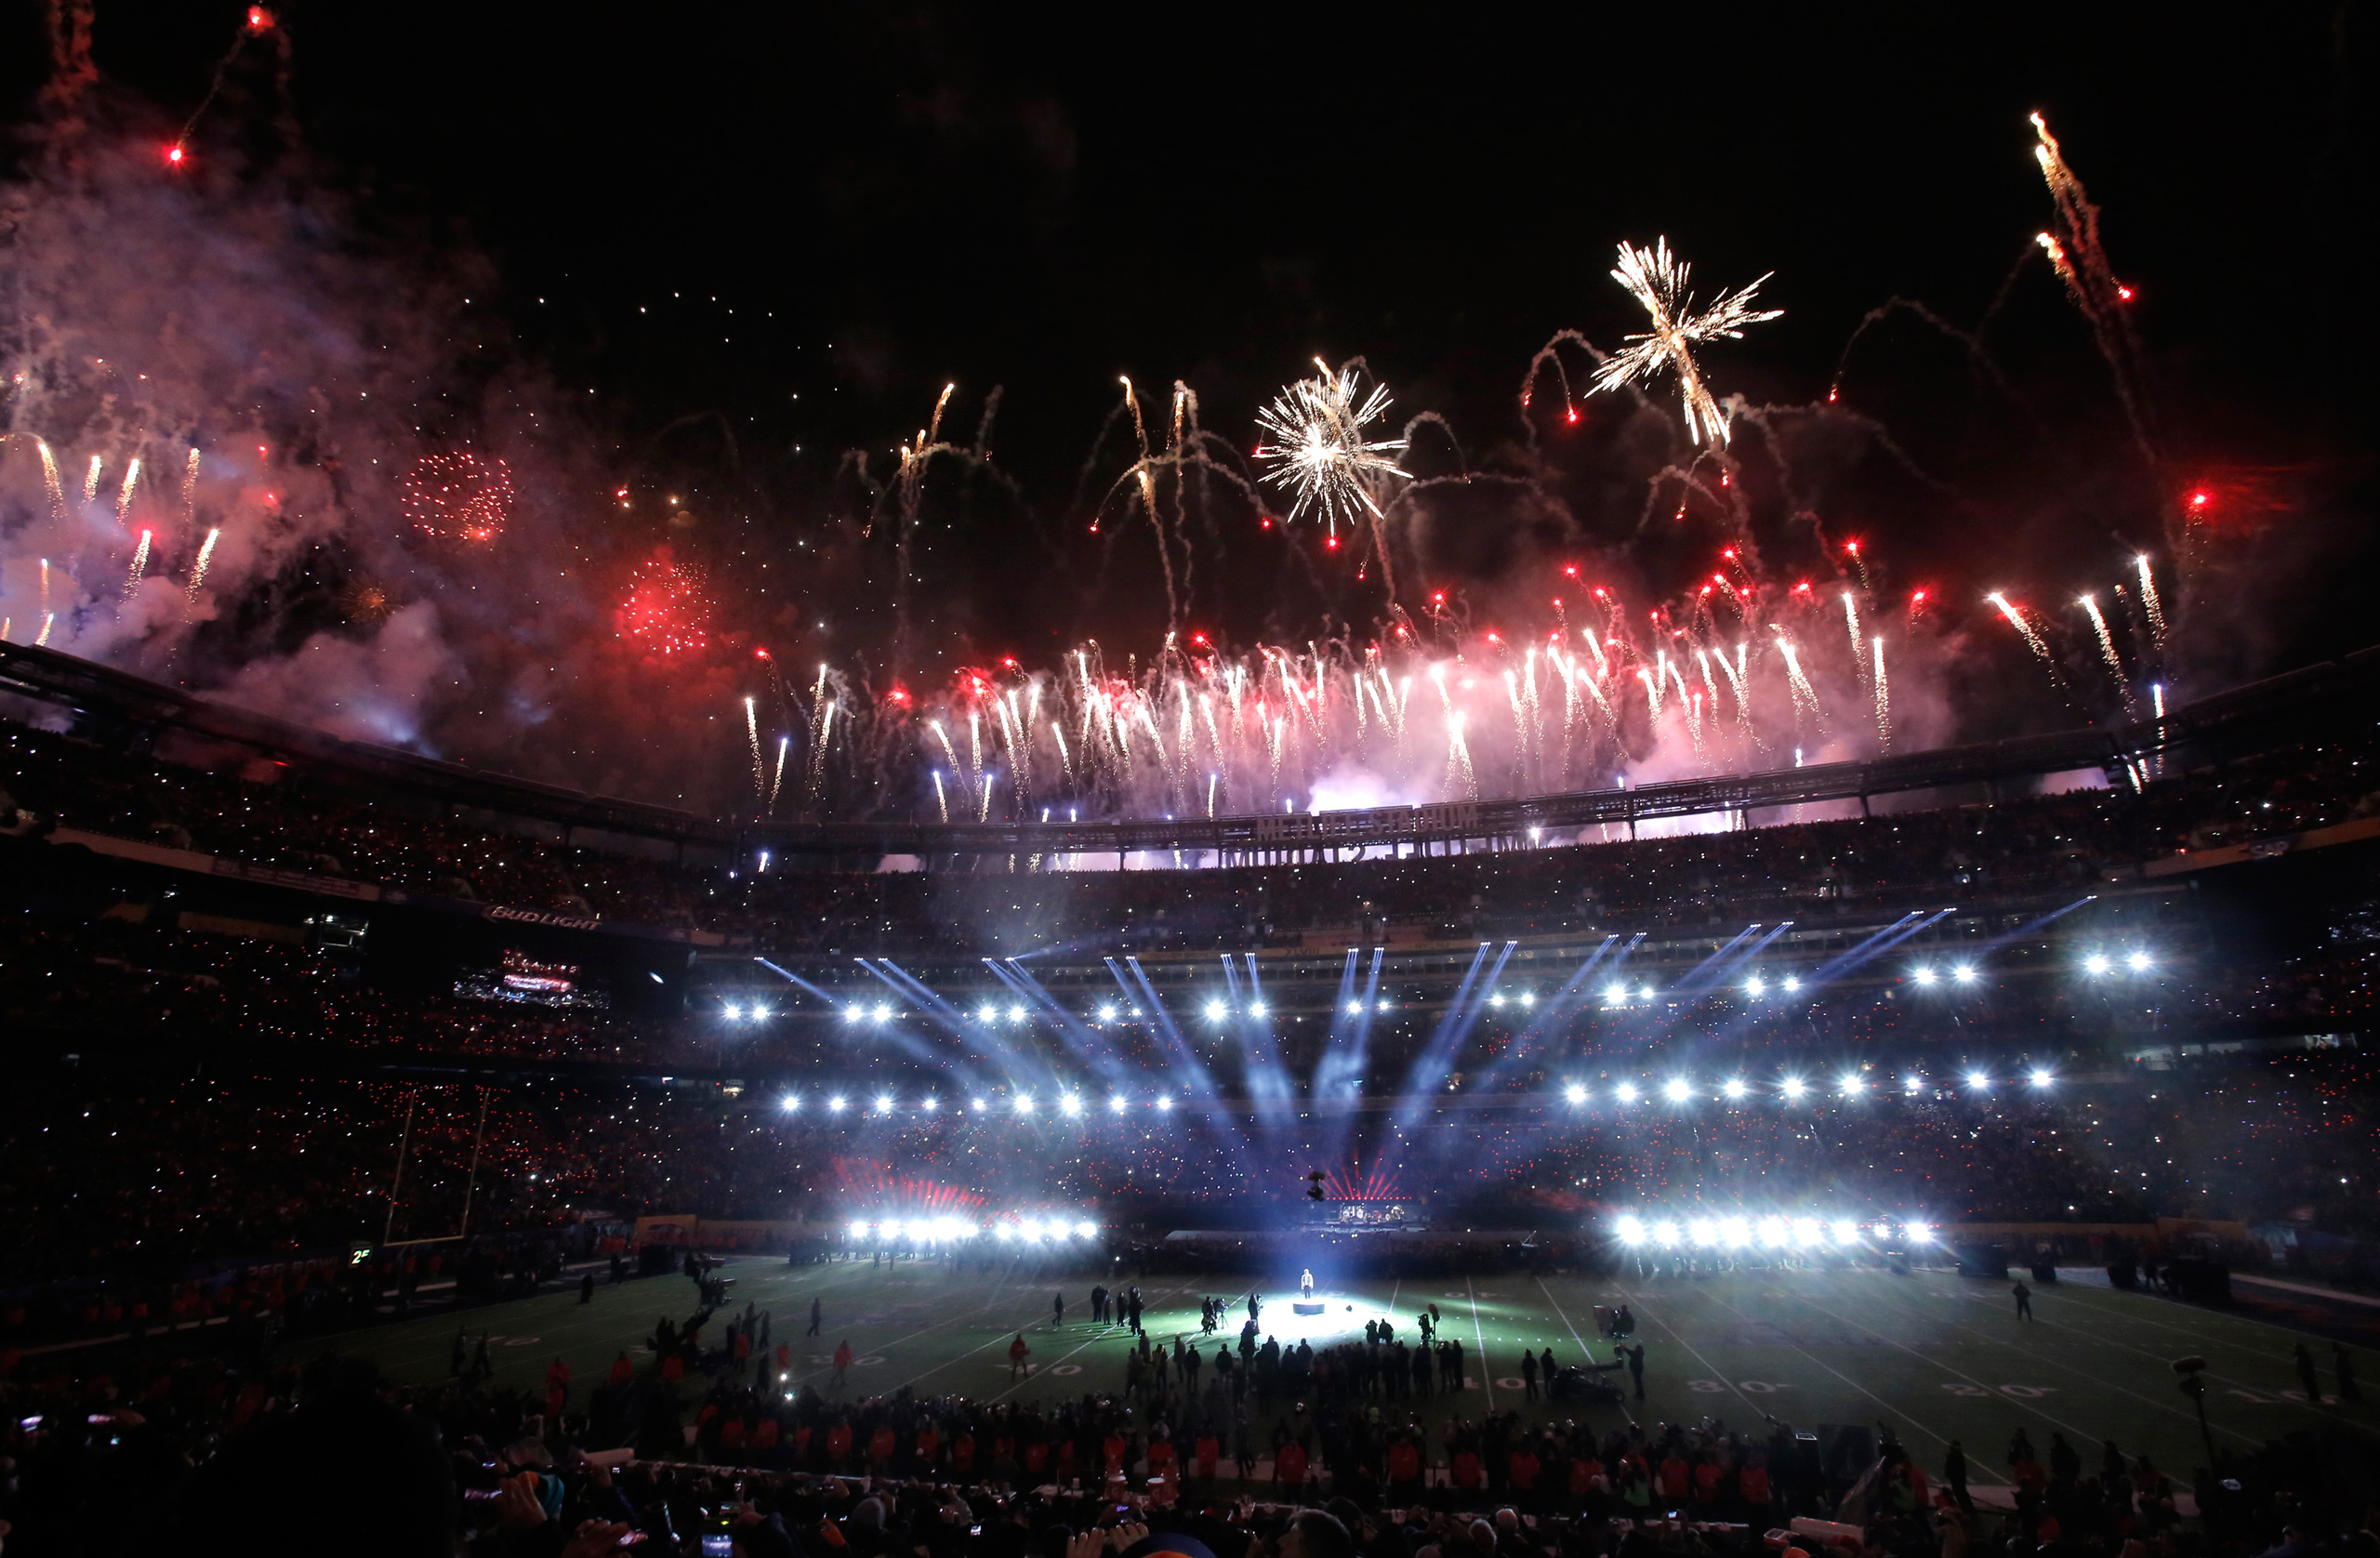 Halftime fireworks erupt during the half-time show of the NFL Super Bowl XLVIII football game between the Denver Broncos and the Seattle Seahawks in East Rutherford, N.J., on Feb. 2, 2014. (Andrew Kelly—Reuters)